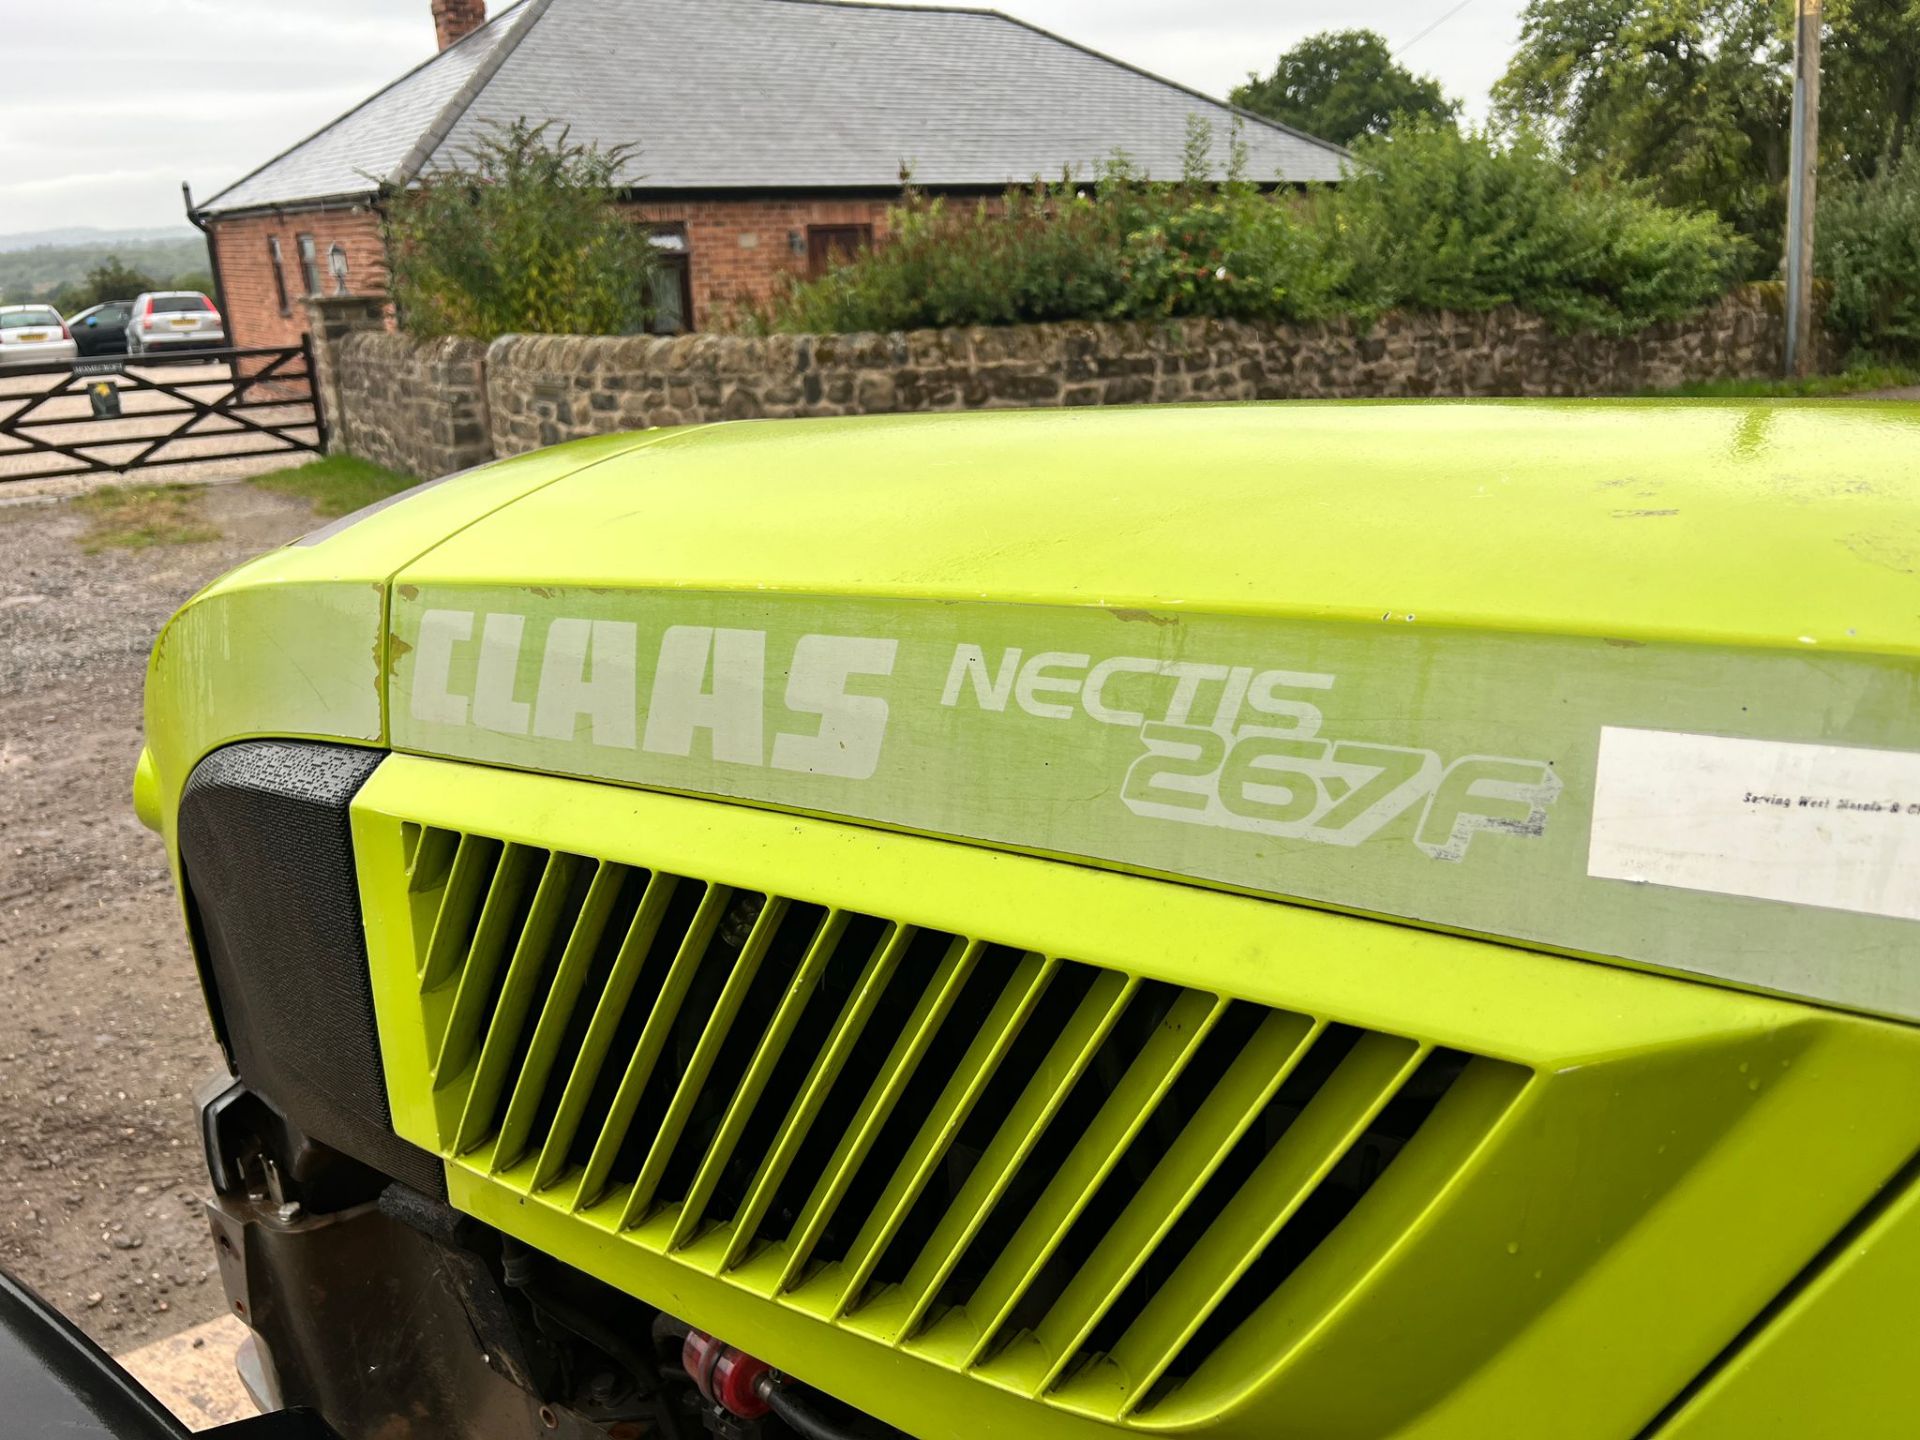 2008 Claas Nectis 267F 97HP 4WD Compact Tractor *PLUS VAT* - Image 11 of 15